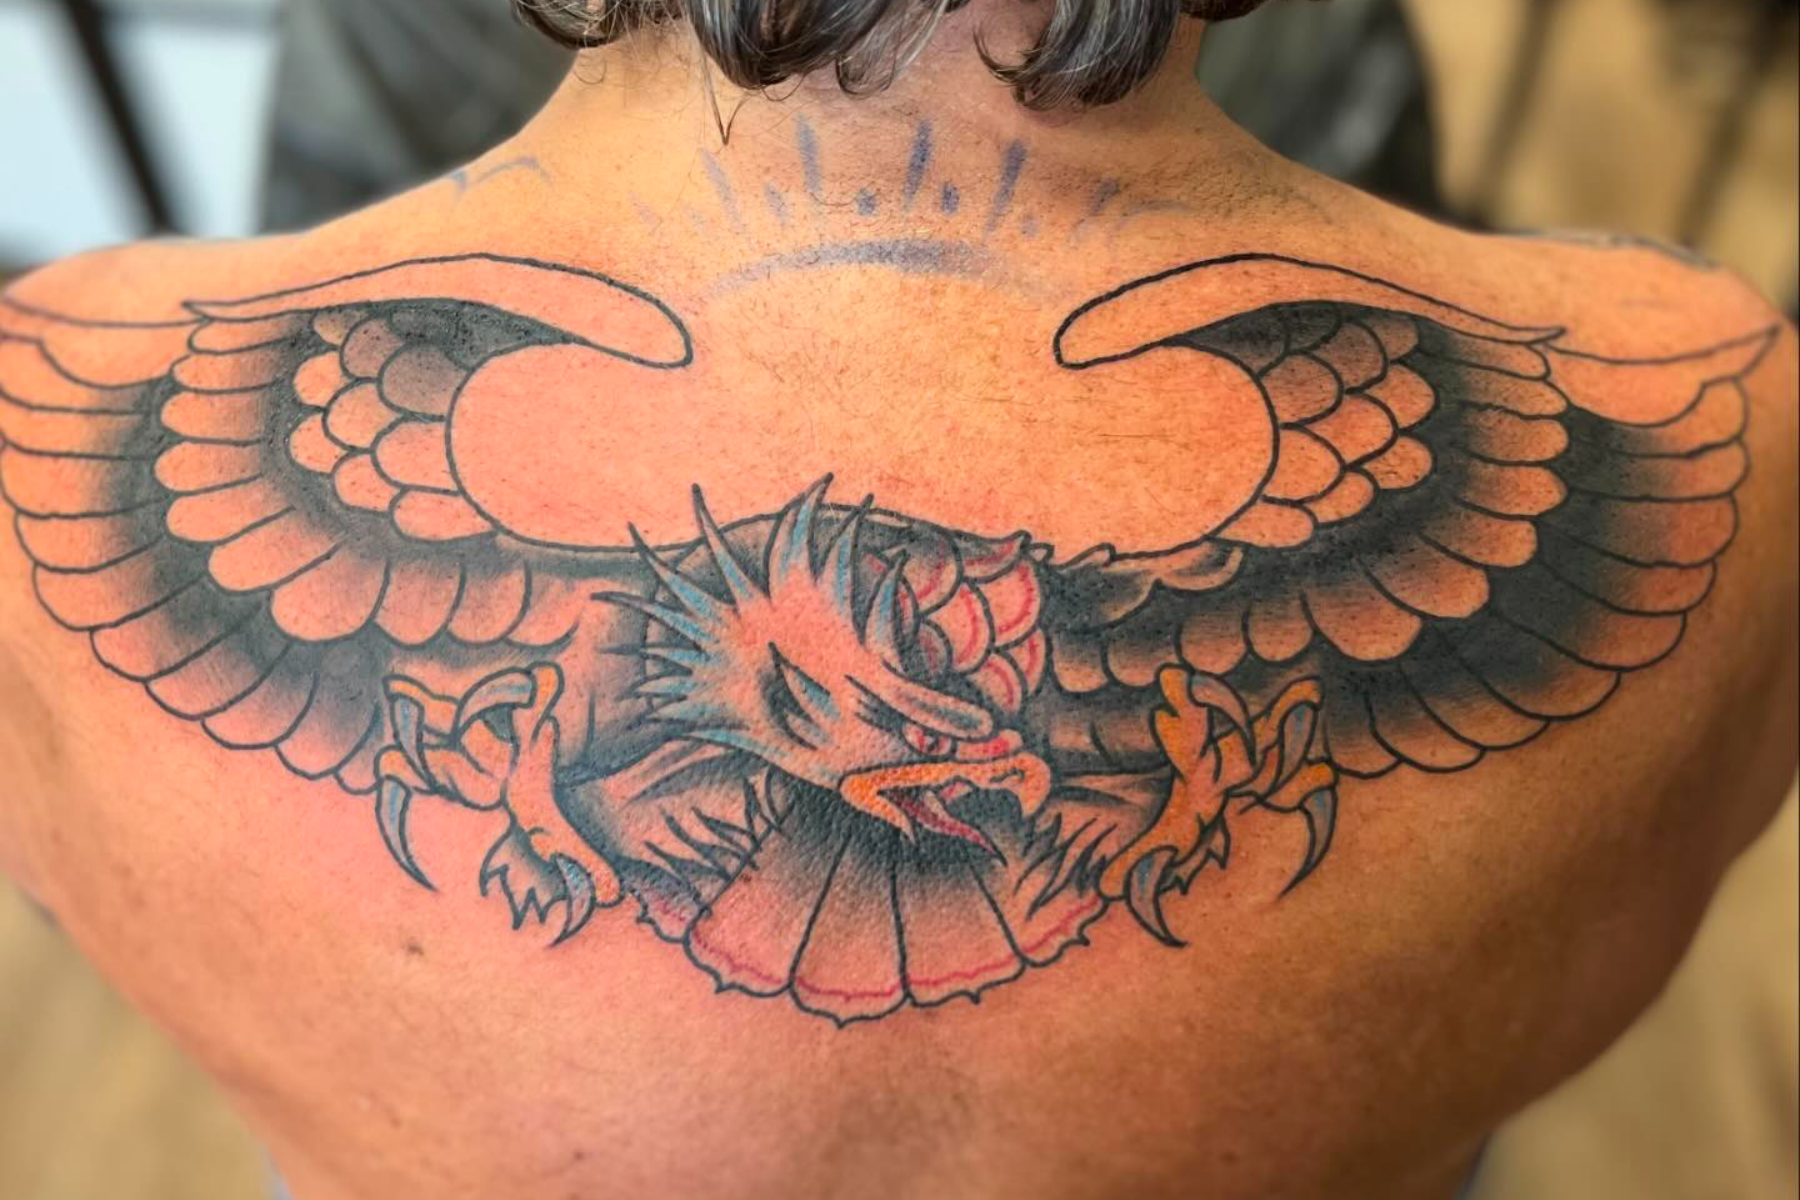 A man is having an eagle tattoo on his upper back